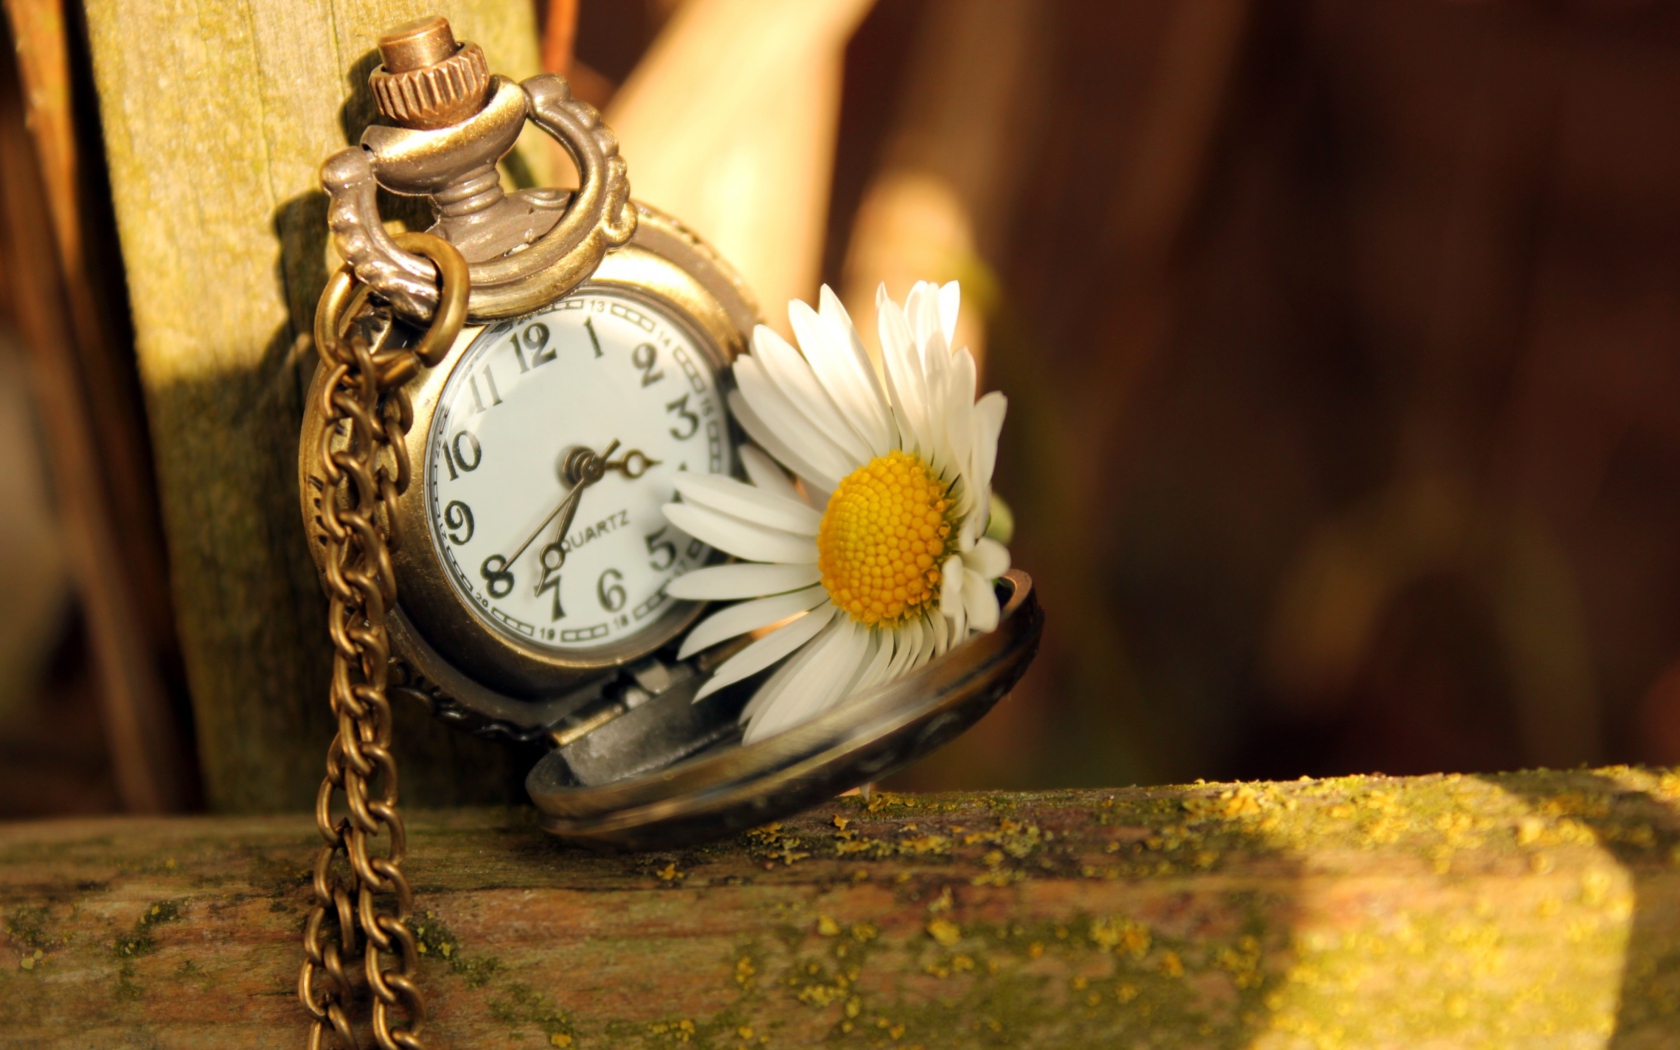 Vintage Watch And Daisy wallpaper 1680x1050